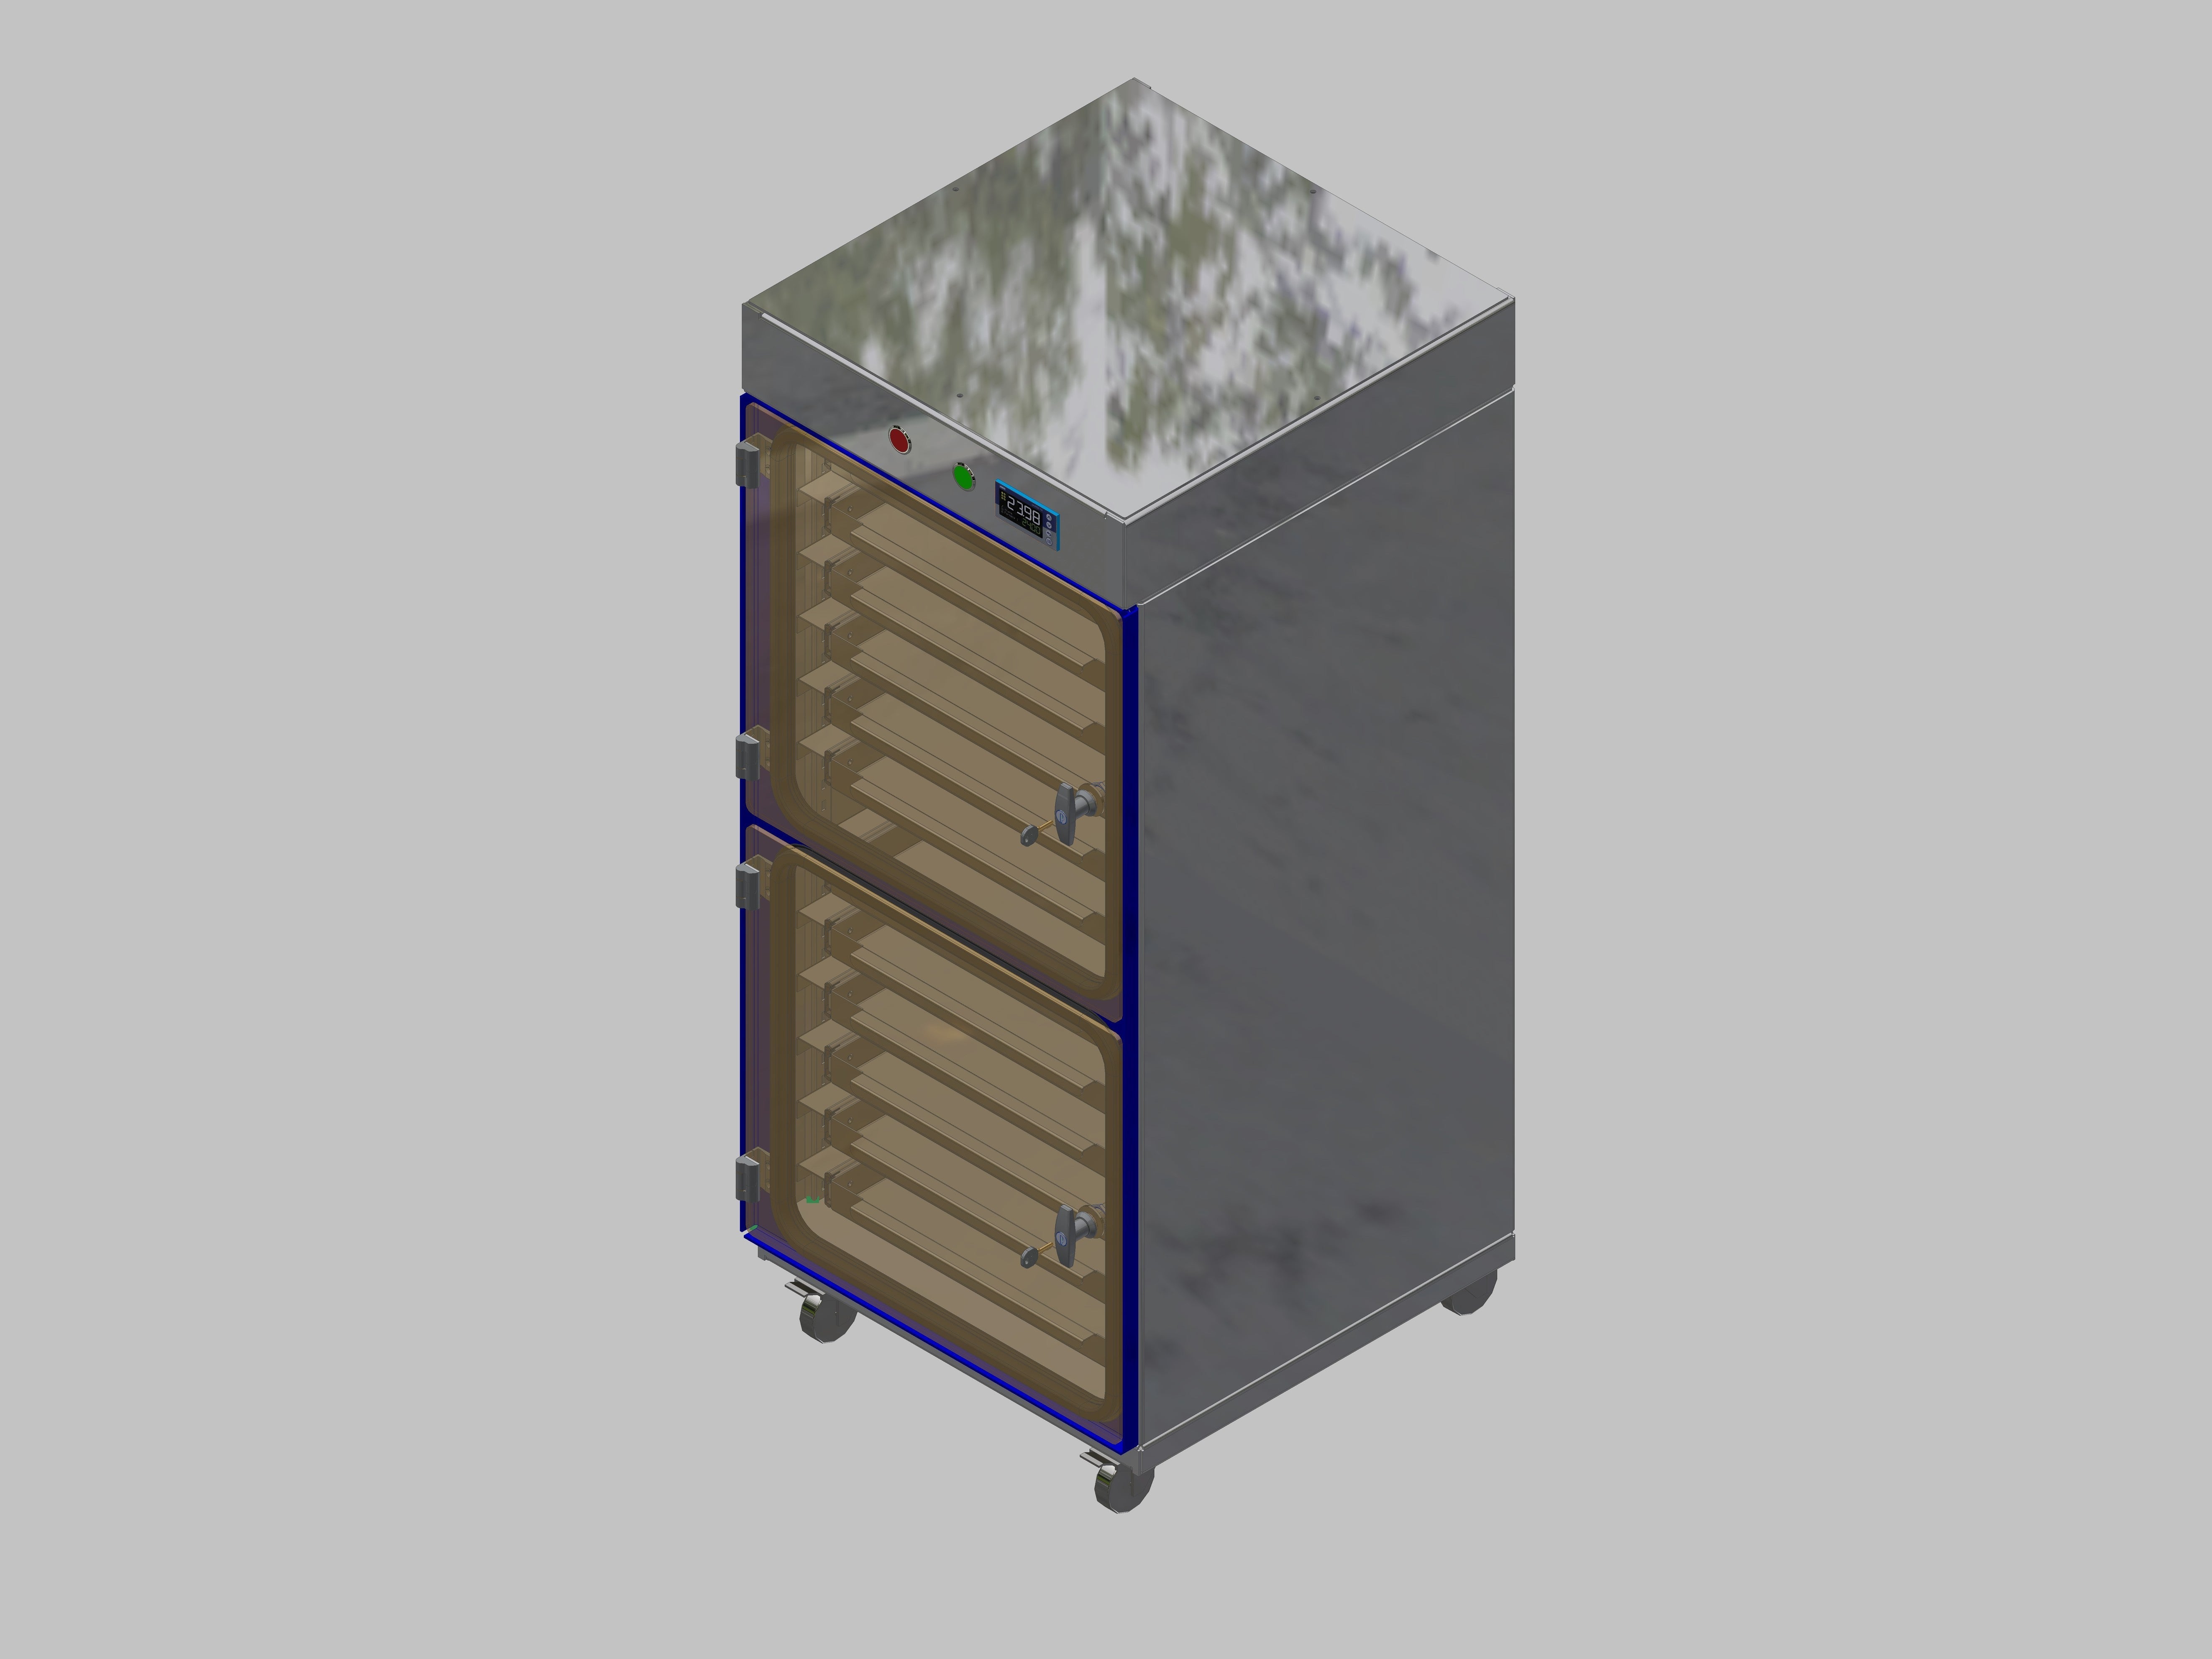 Dry storage cabinet-ITN-600-2 with 6 drawers per compartment and base design with wheels